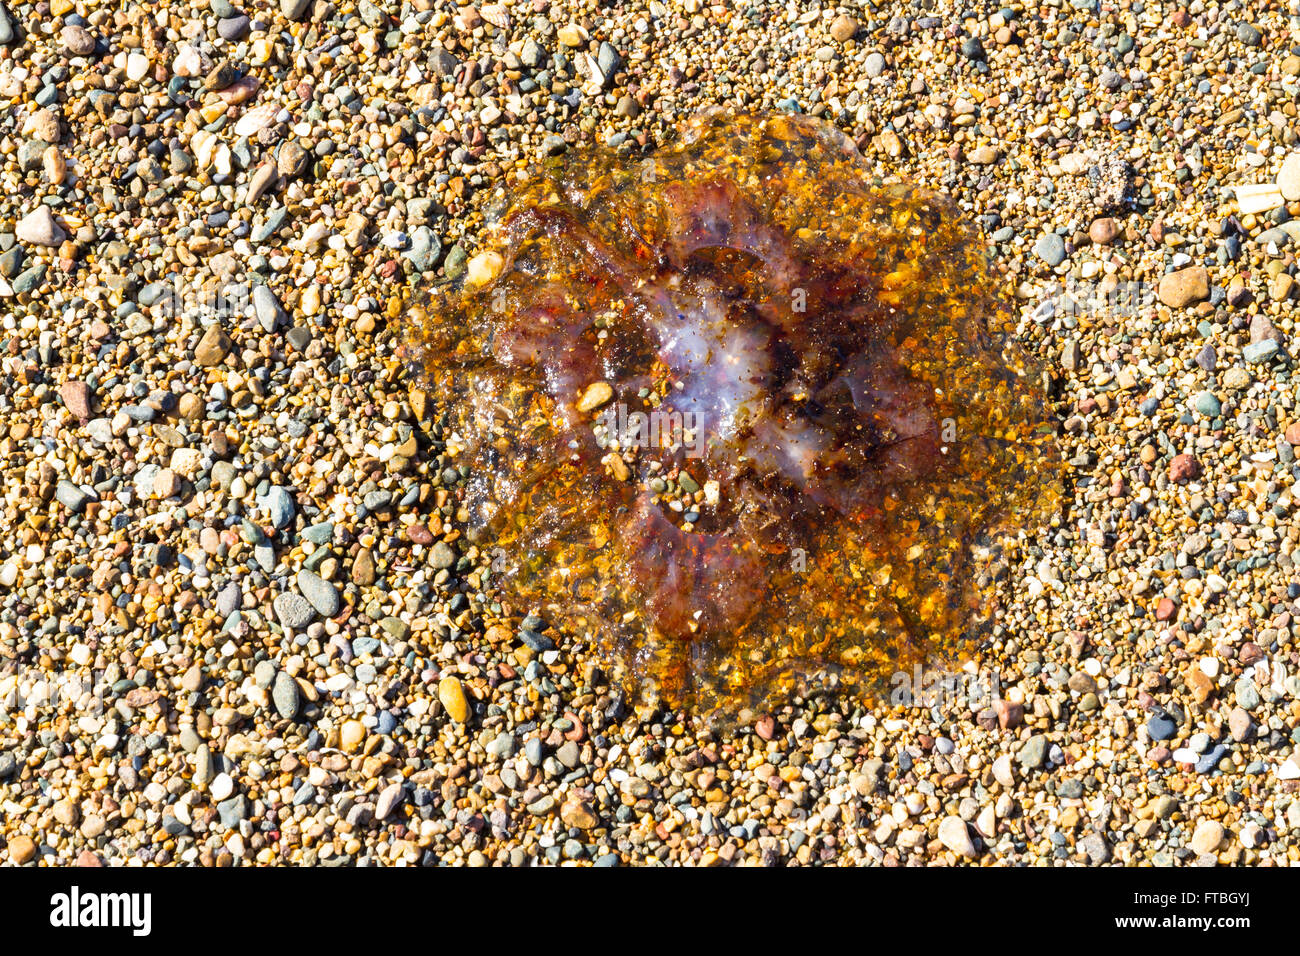 Jellyfish or jellie, part of phylum  Cnidaria washed up on pebble beach. Stock Photo